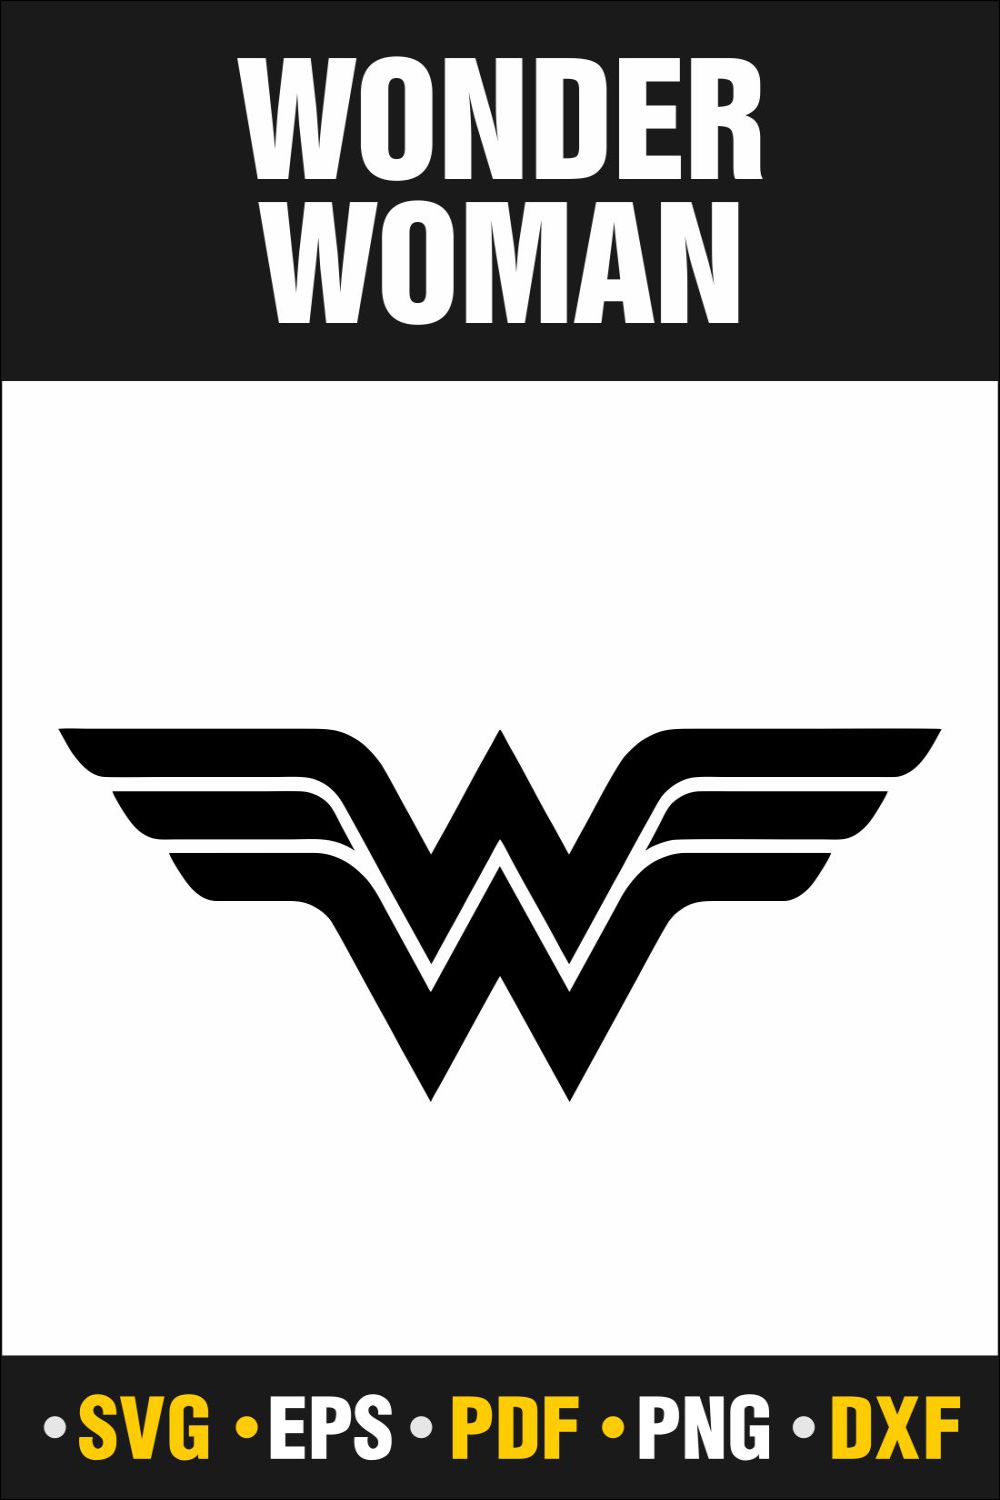 Wonder Woman Svg, Wonder Woman, Woman Svg, Wonder Woman Png, Wonder Woman Monogram Png, Marvel Svg, DC Svg, Instant Download Vector Cut file Cricut, Silhouette, Pdf Png, Dxf, Decal pinterest preview image.